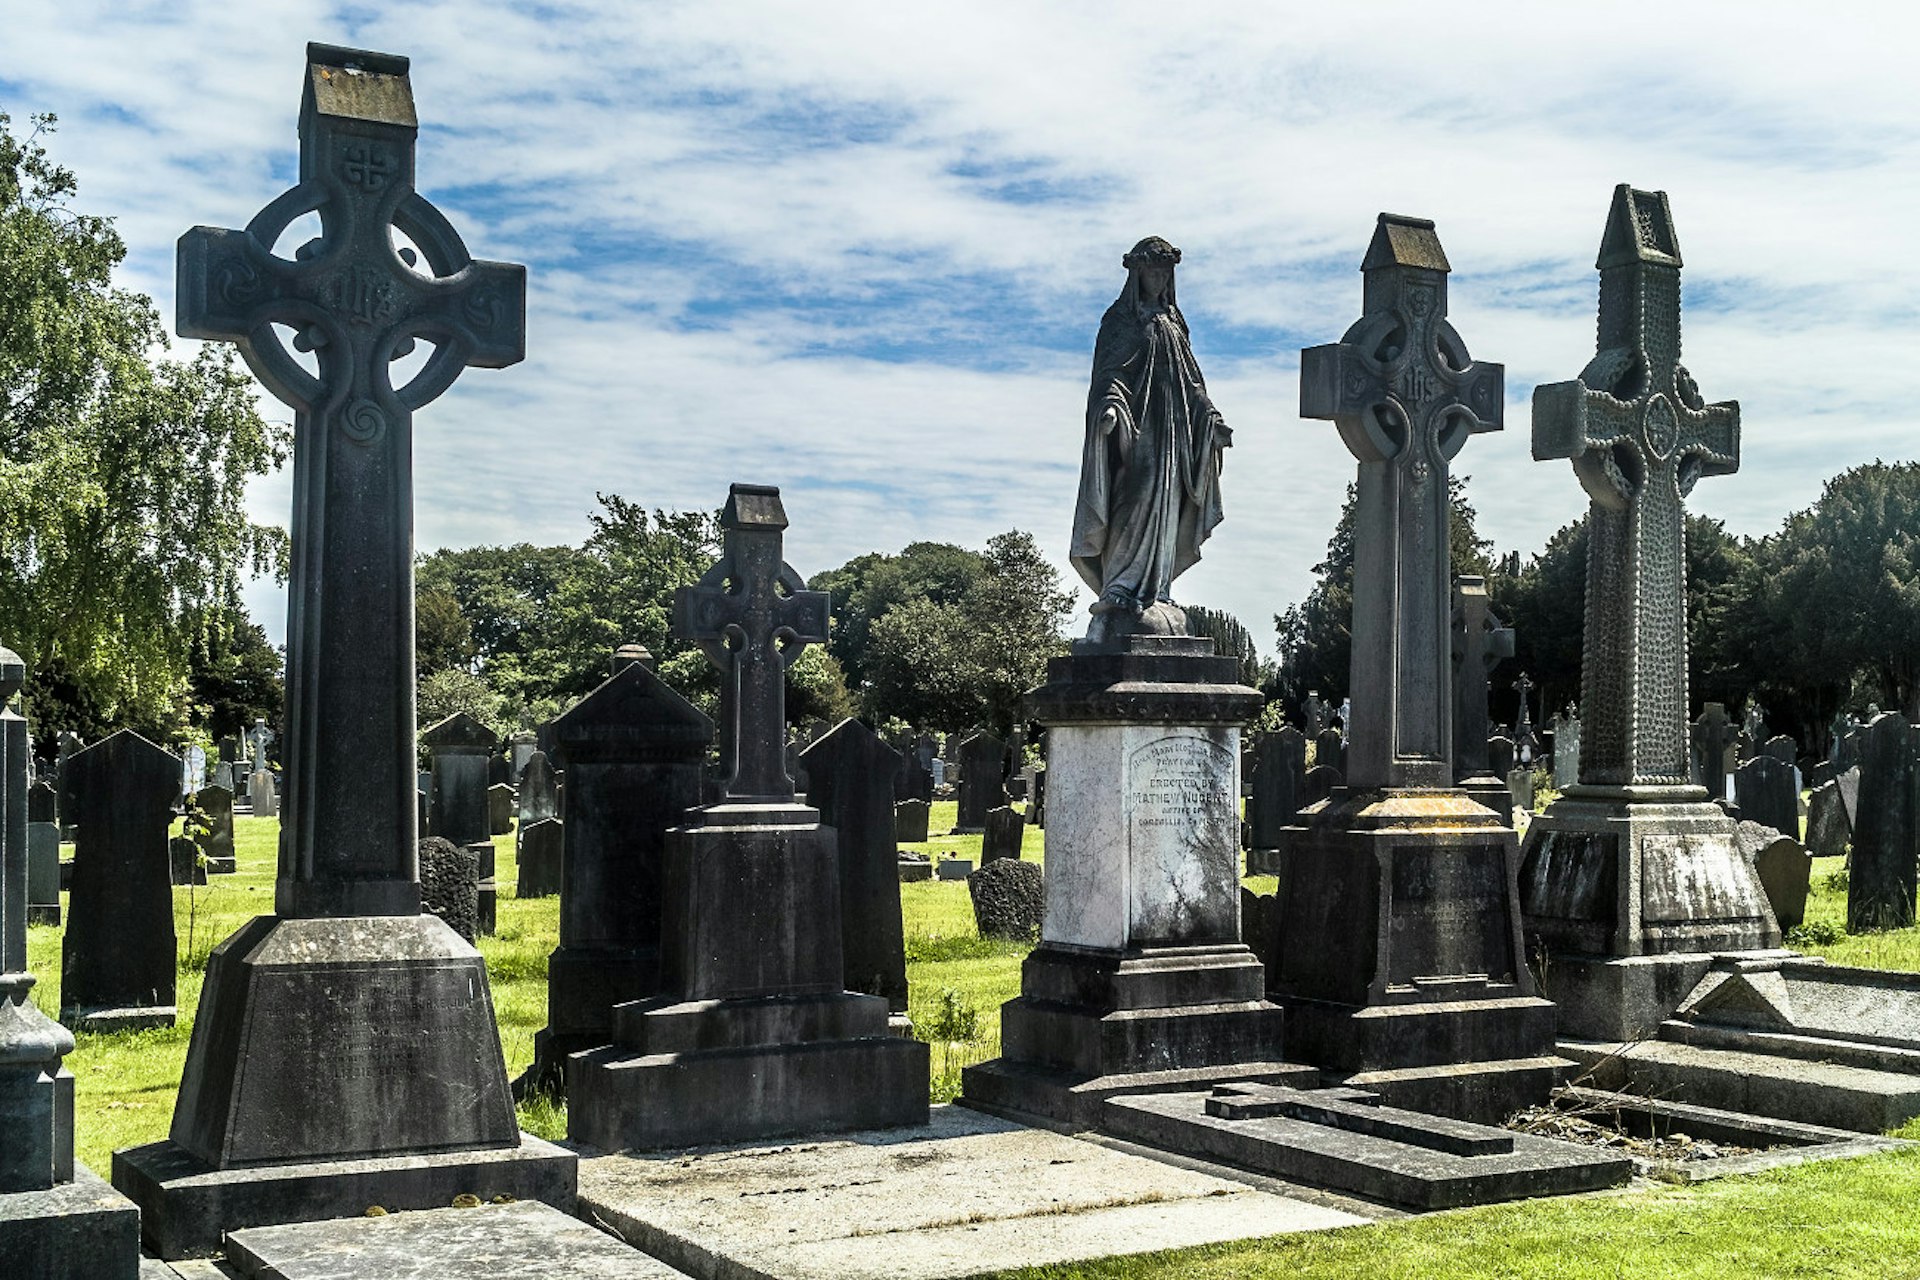 Glasnevin Cemetery. Image by William Murphy / CC BY-SA 2.0